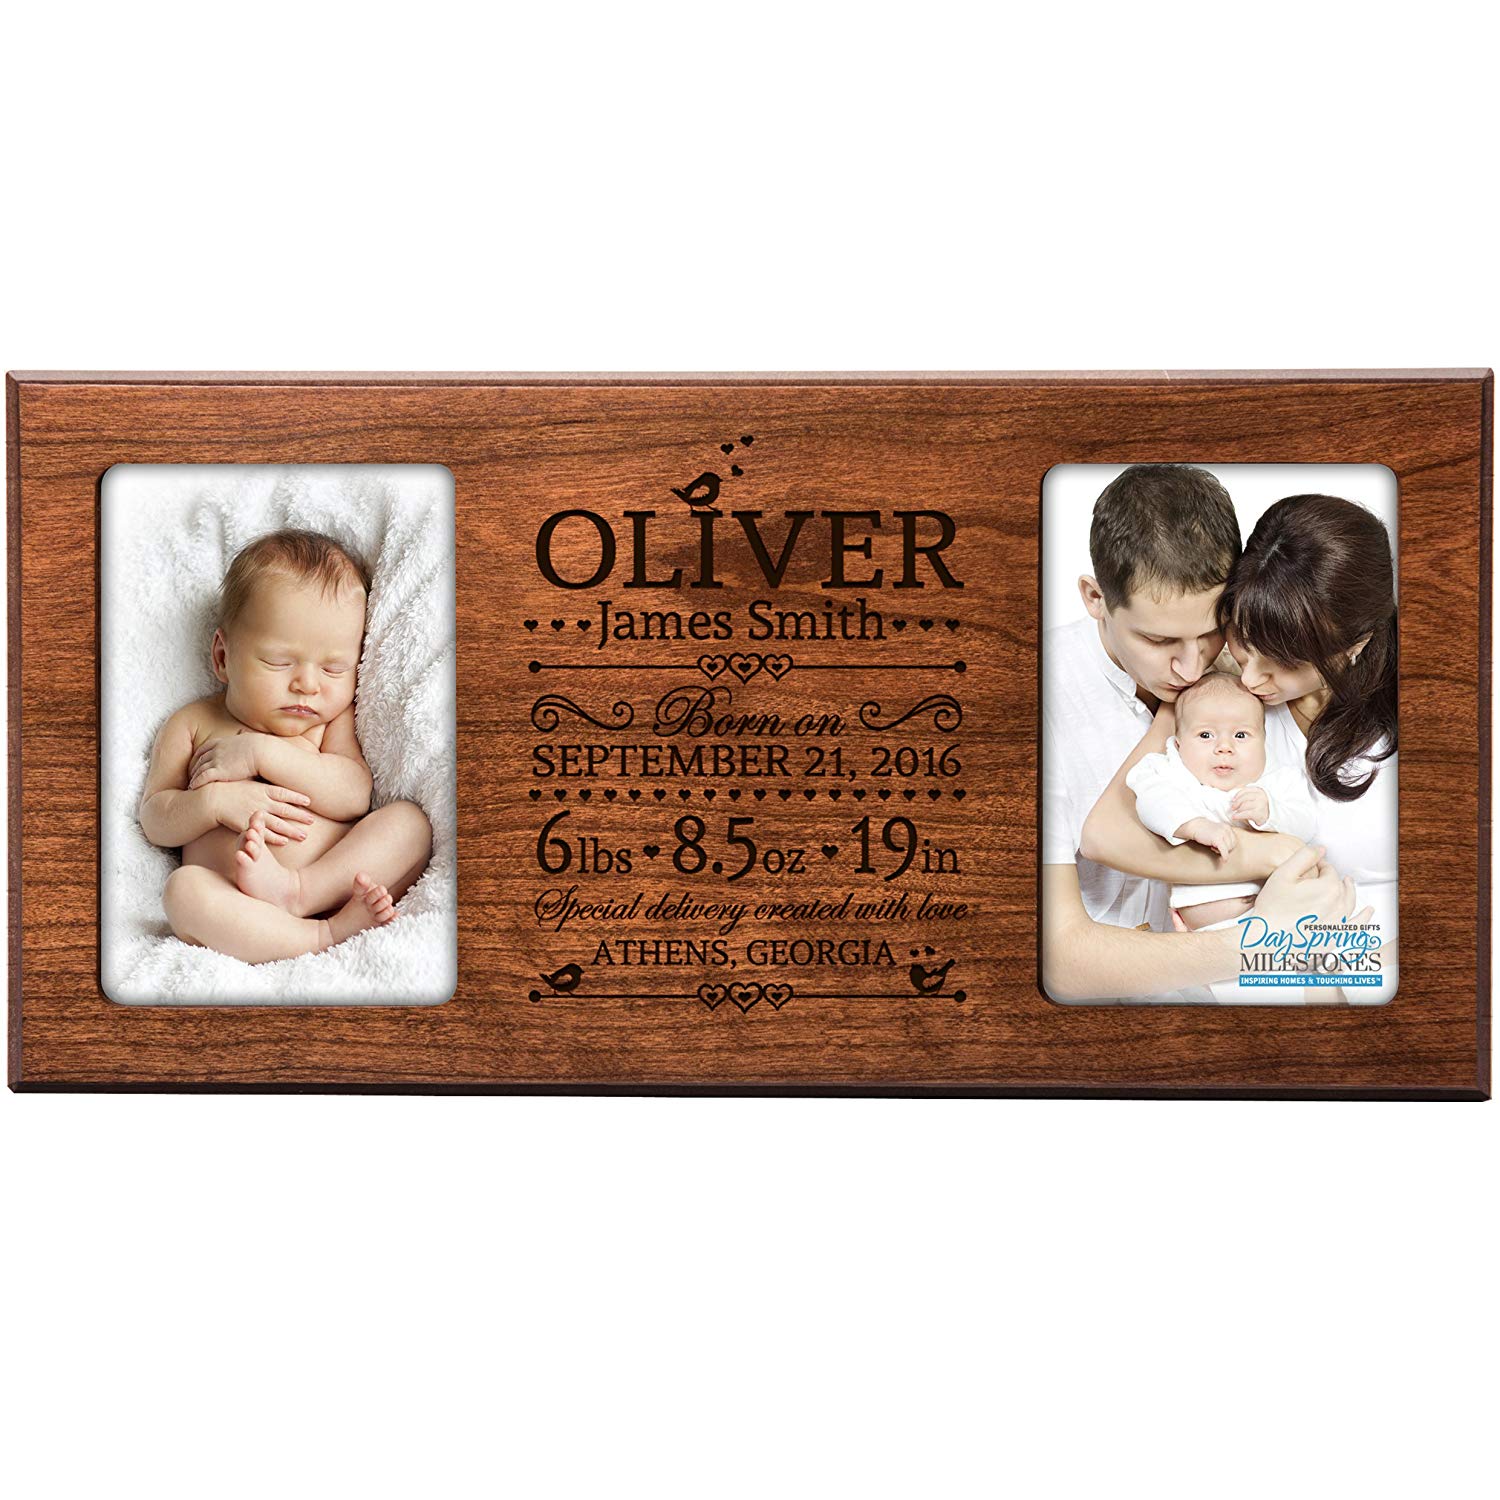 Personalized Baby Announcement Double Photo Frame - Special Delivery - LifeSong Milestones